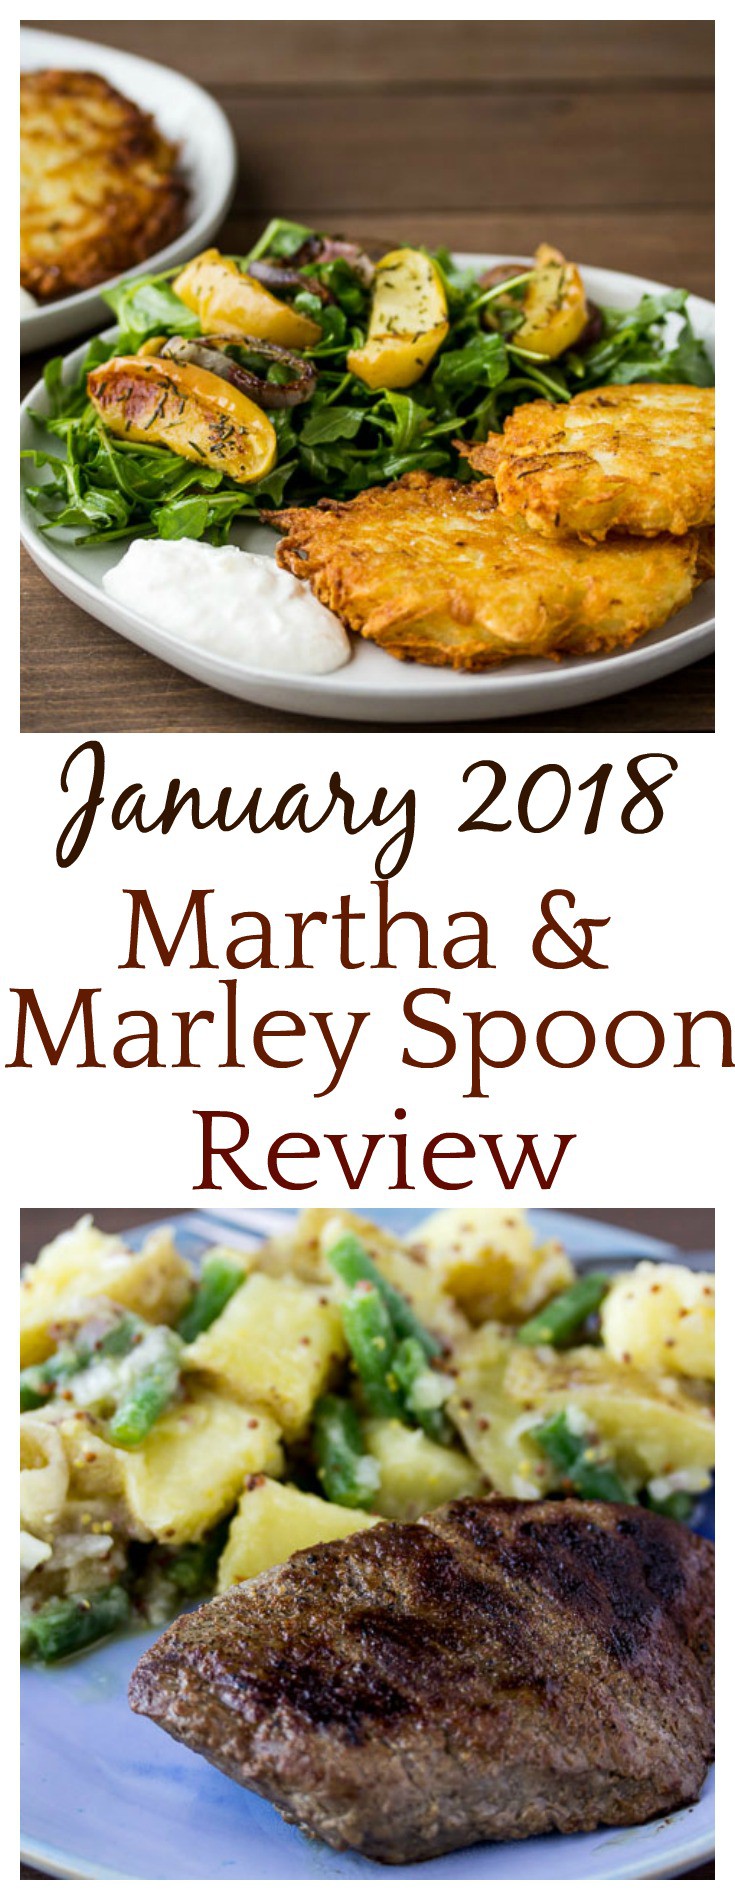 Interested in trying meal kit subscriptions? Definitely check out this Martha & Marley Spoon Review! The recipes were amazing! | #marthamarleyspoon #marleyspoon #mealkits #subscriptionbox #mealkitreview